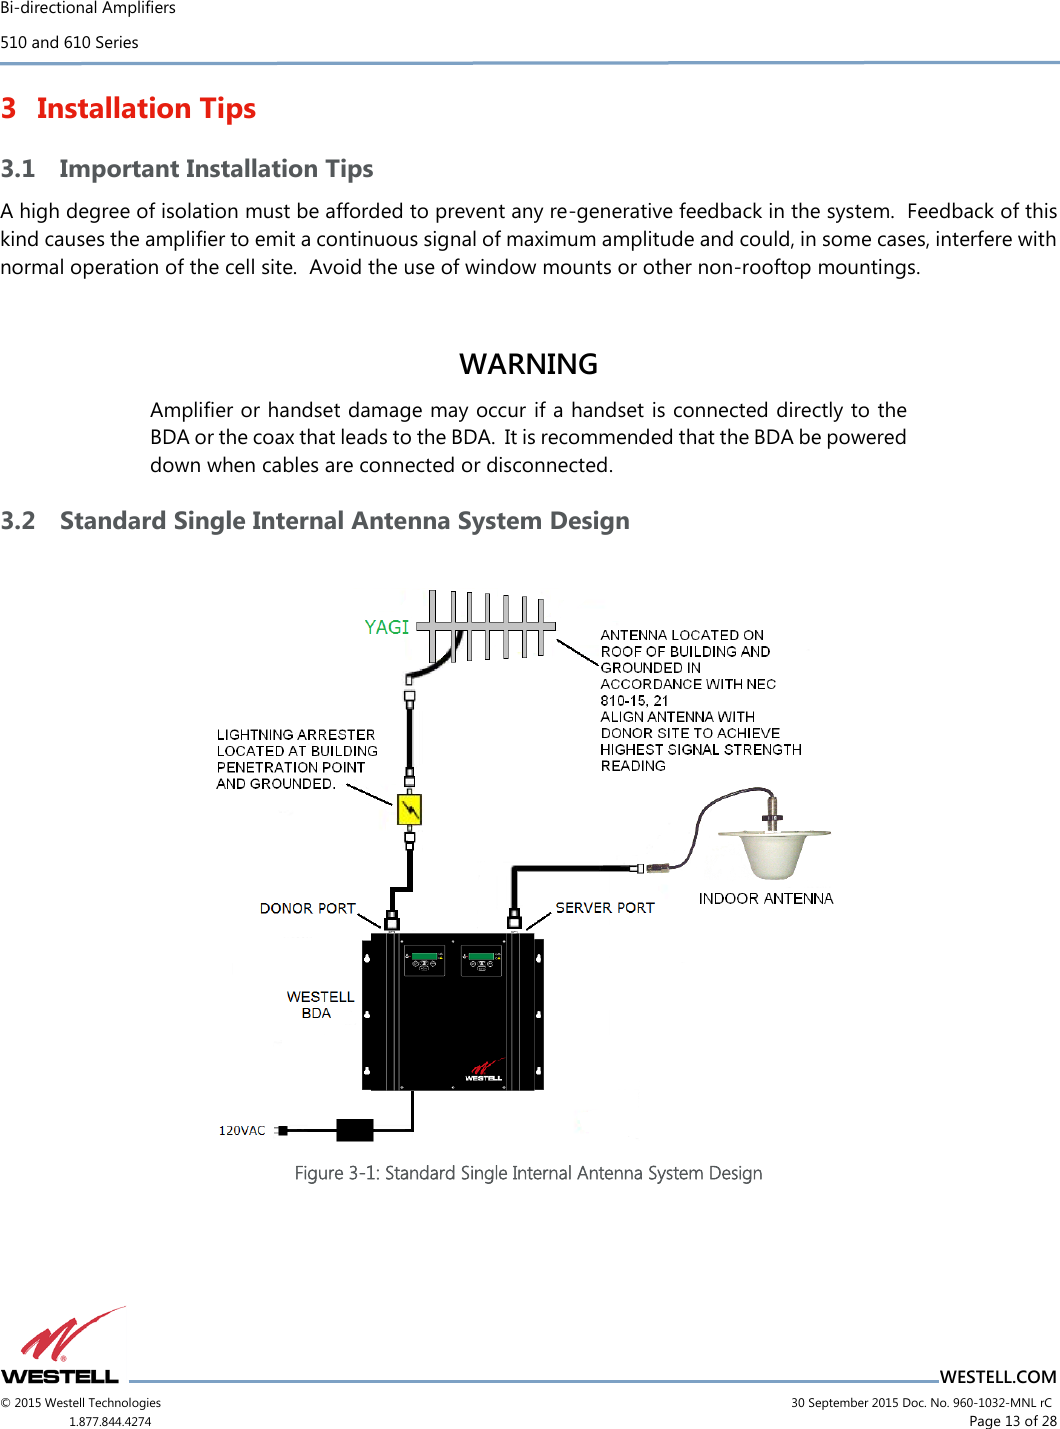 Bi-directional Amplifiers 510 and 610 Series                          WESTELL.COM © 2015 Westell Technologies                             30 September 2015 Doc. No. 960-1032-MNL rC 1.877.844.4274                      Page 13 of 28  3 Installation Tips 3.1 Important Installation Tips A high degree of isolation must be afforded to prevent any re-generative feedback in the system.  Feedback of this kind causes the ampliﬁer to emit a continuous signal of maximum amplitude and could, in some cases, interfere with normal operation of the cell site.  Avoid the use of window mounts or other non-rooftop mountings.   WARNING Ampliﬁer or handset damage may occur if a handset is connected directly to the BDA or the coax that leads to the BDA.  It is recommended that the BDA be powered down when cables are connected or disconnected.   3.2 Standard Single Internal Antenna System Design   Figure 3-1: Standard Single Internal Antenna System Design    